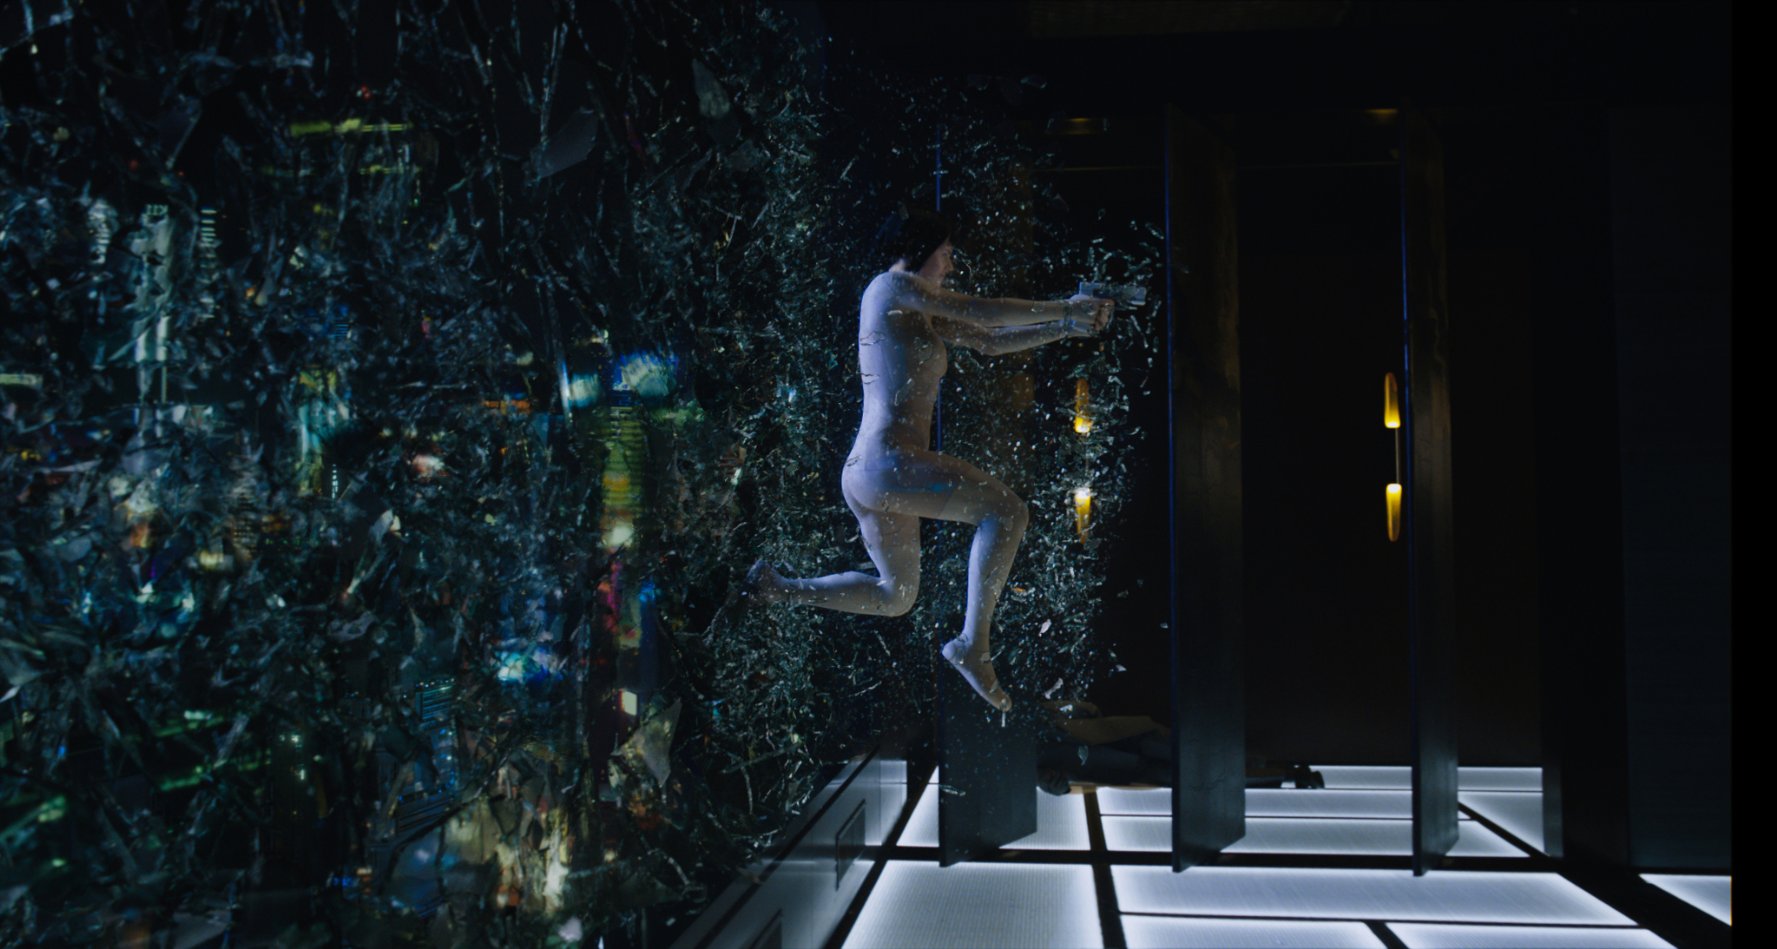 ghost in the shell 1